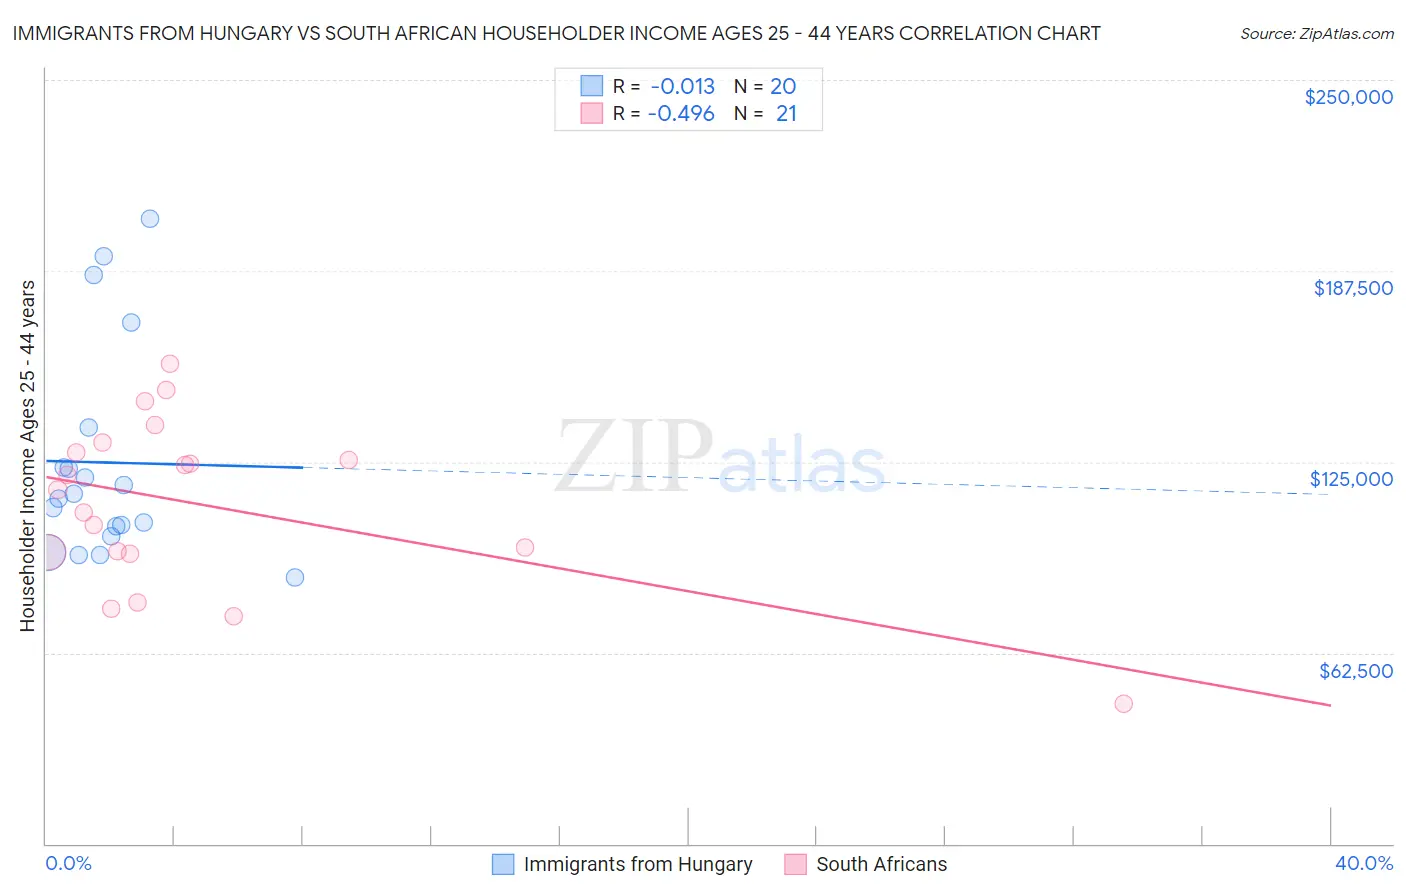 Immigrants from Hungary vs South African Householder Income Ages 25 - 44 years